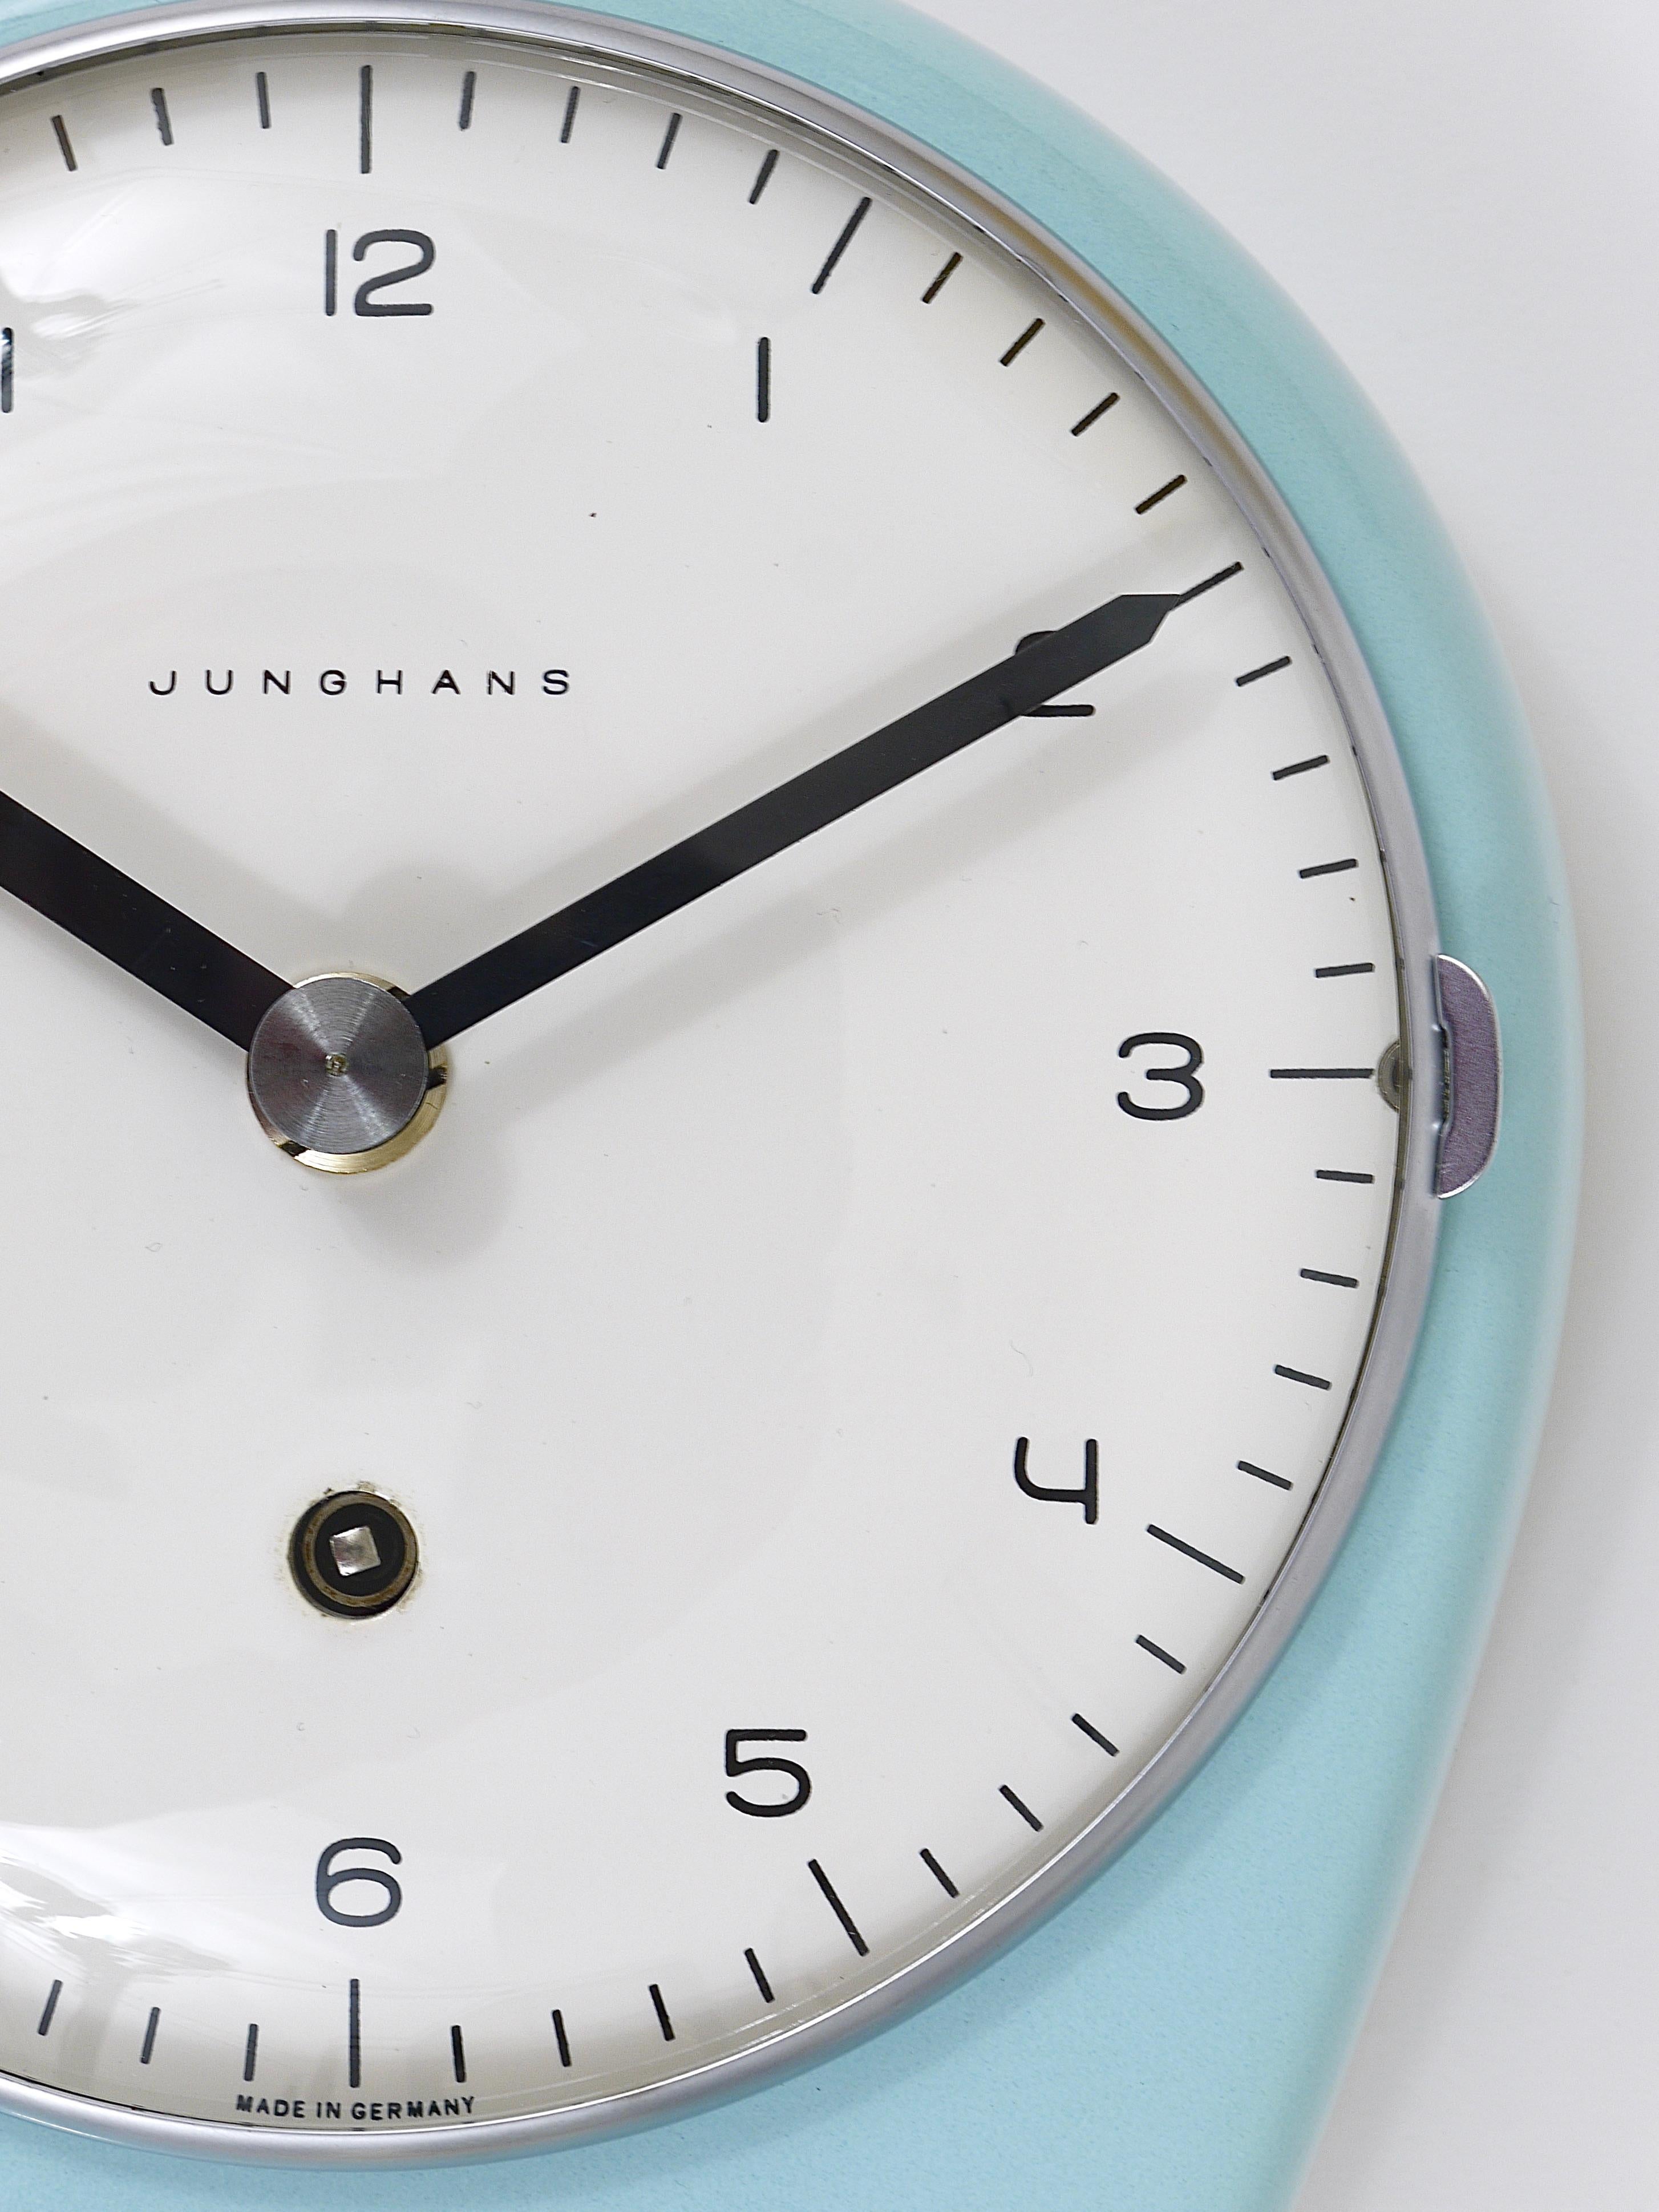 Glazed Max Bill Wall Clock, Pastel Blue, Mid-Century Modern, Junghans Germany, 1950s For Sale